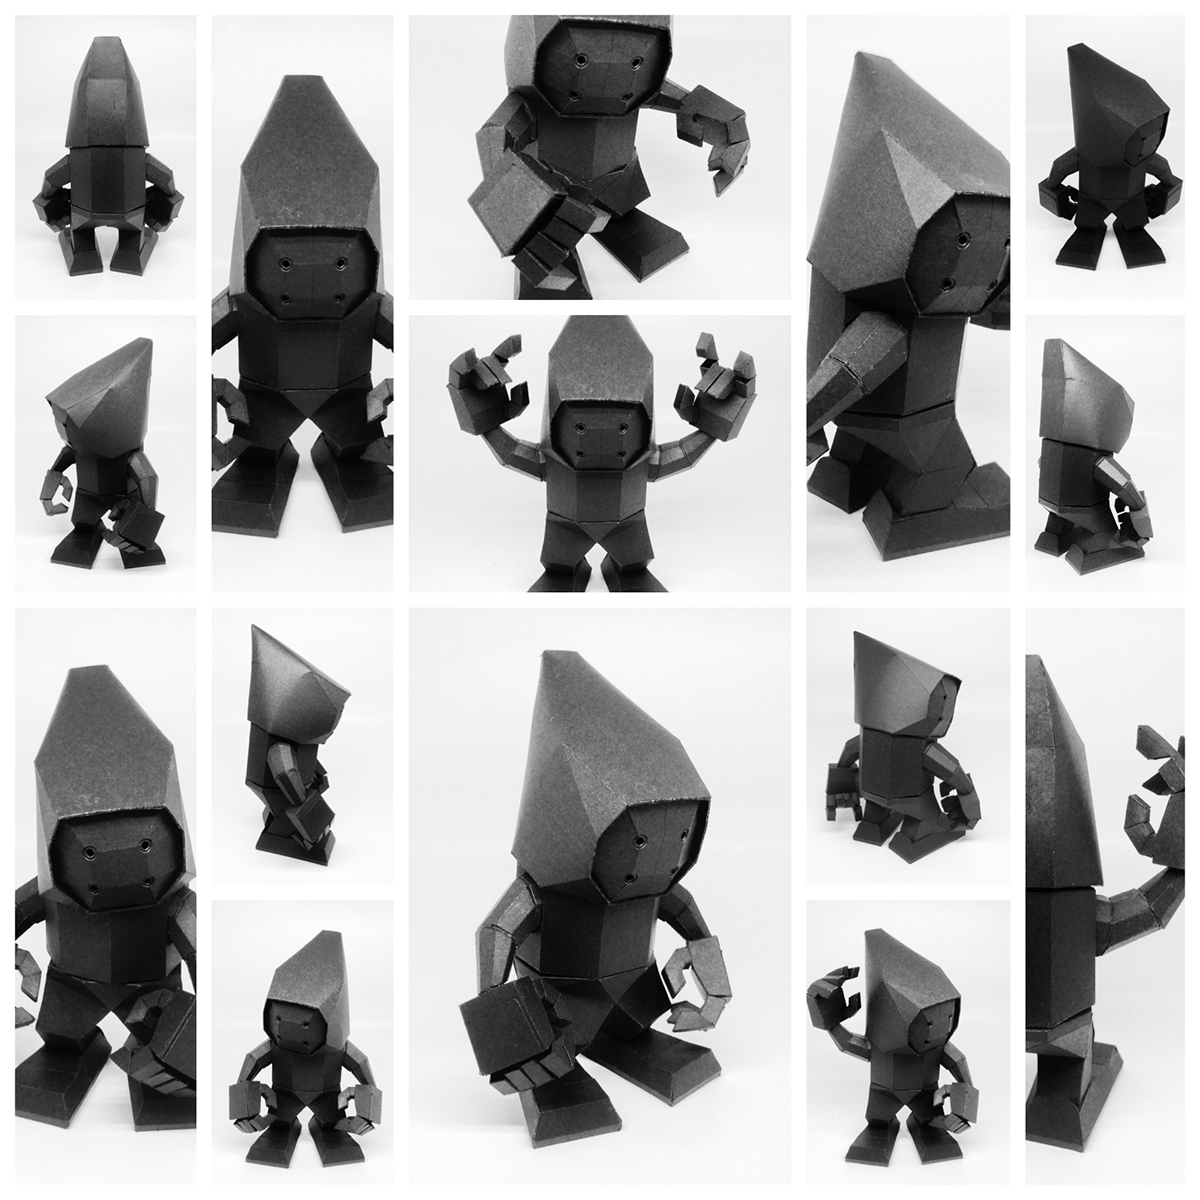 papertoy HelpBot FallingOrbsProject artttoy toys papercraft